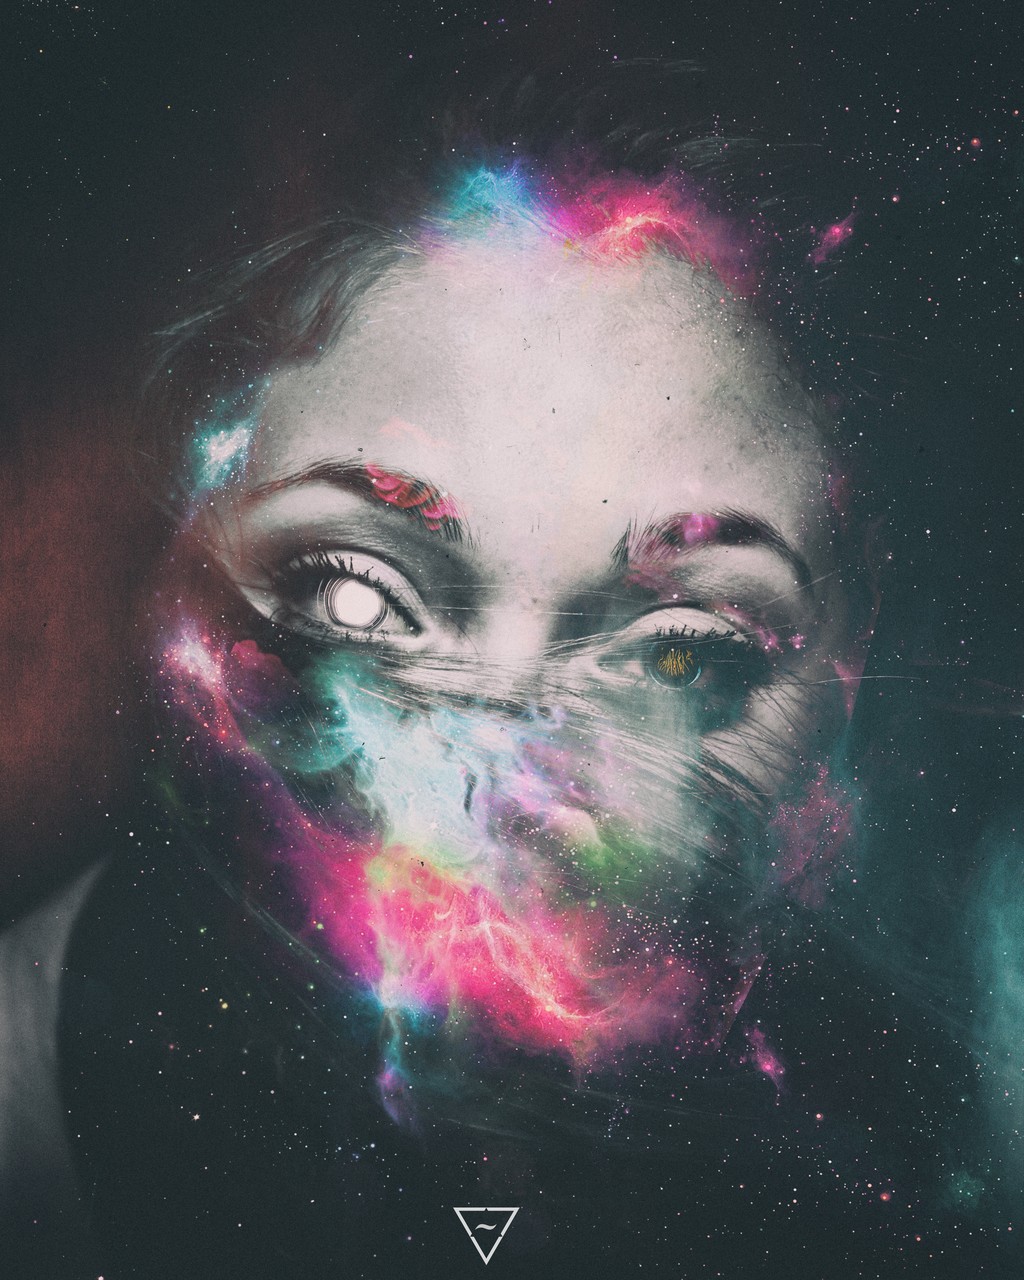 Wallpaper, 1024x1280 px, abstract, face, photo manipulation, Photohop, space, women 1024x1280